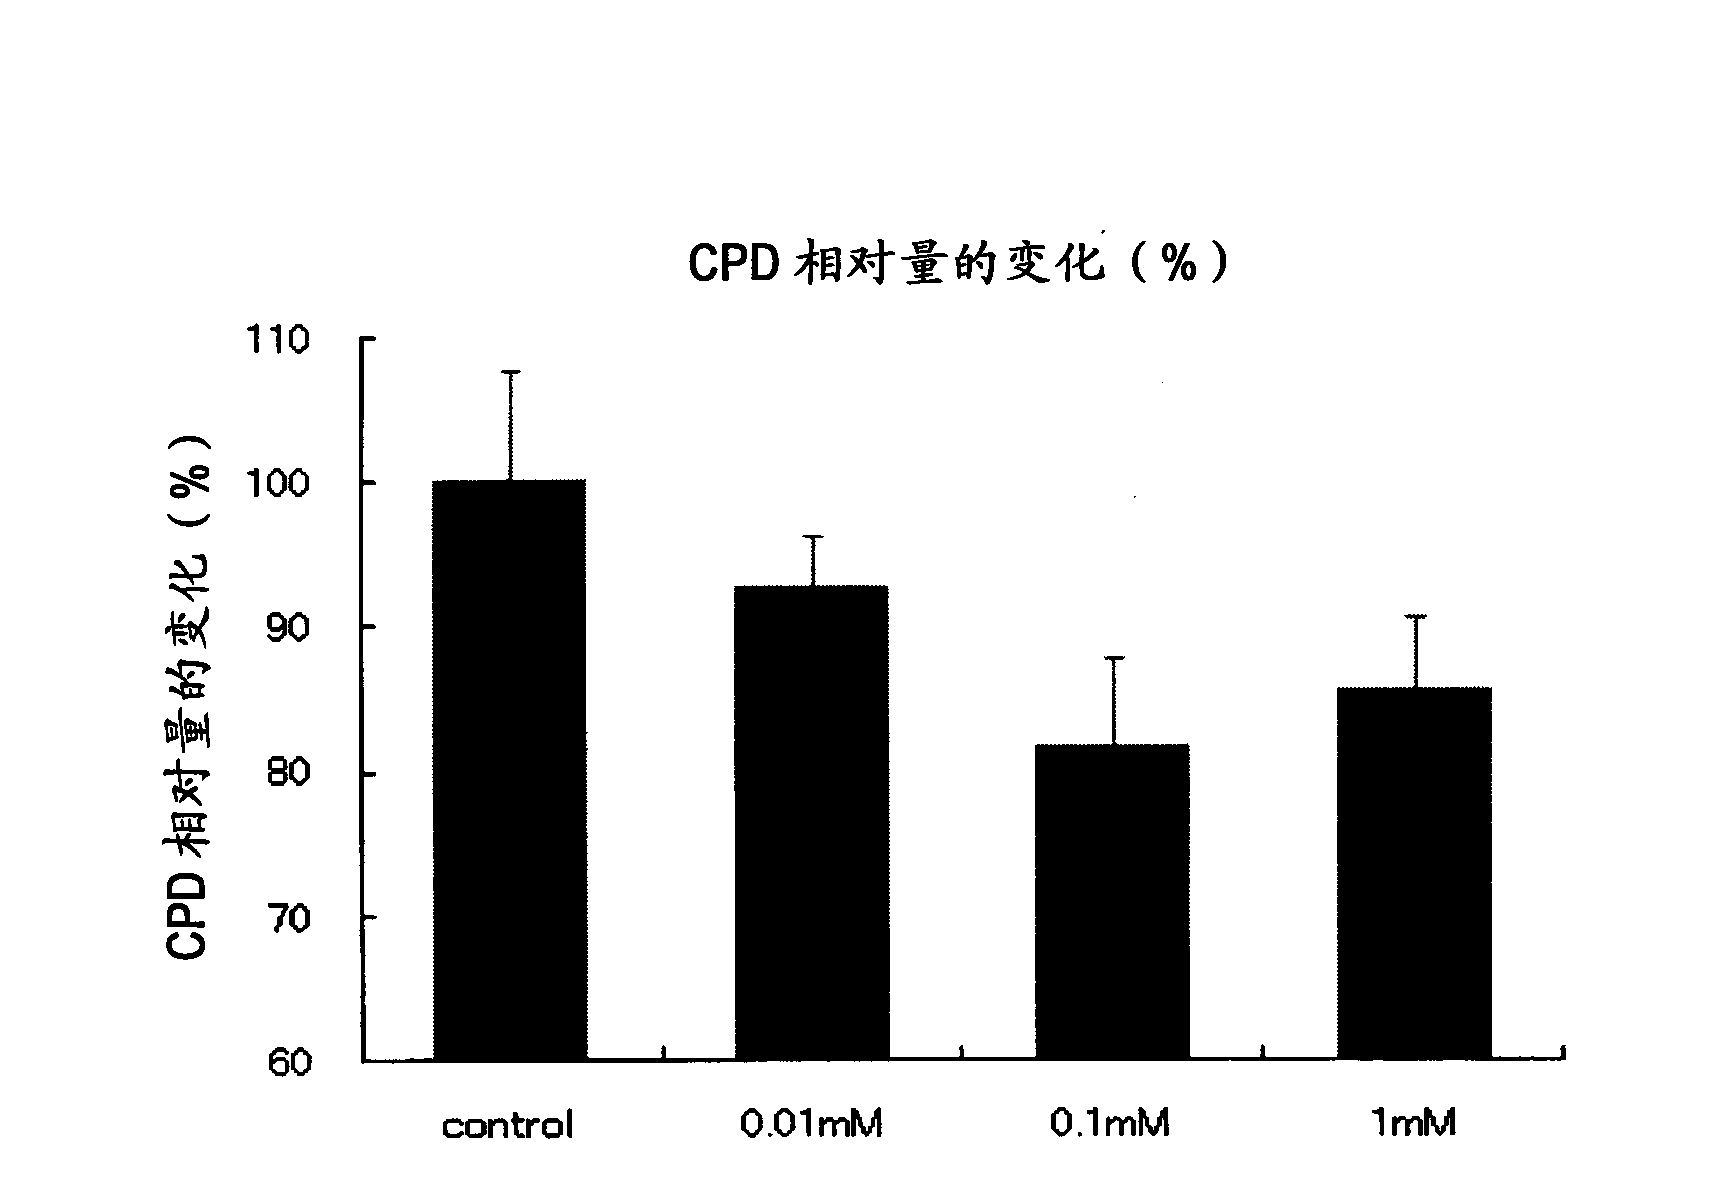 Agent for suppressing the formation of abnormal skin cells caused by exposure to light